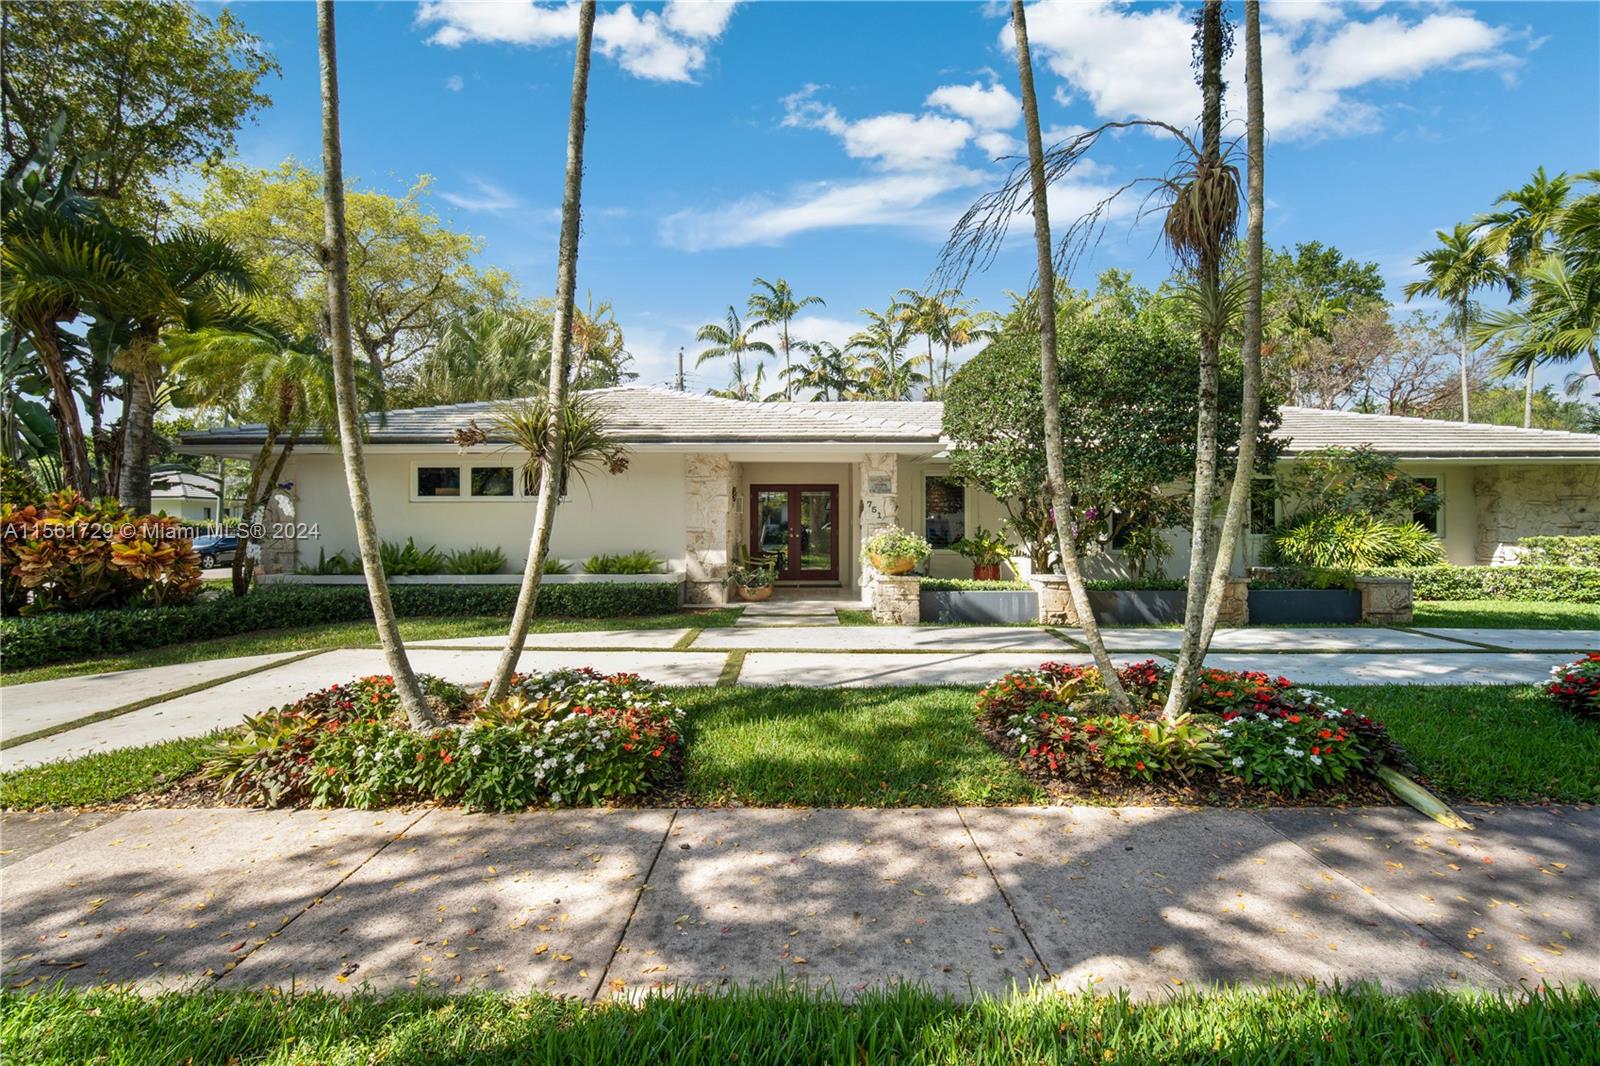 Sought after South Gables Location! Enter this lushly landscaped  5 bedroom / 4 bath gem which features a heated pool and screened patio, side-entry double car garage, and updates including: New septic tank and drain field, impact windows & shutters, copper hot water pipes, remodeled primary bathroom, new floors in three of the bedrooms. Excellent schools! A must see!